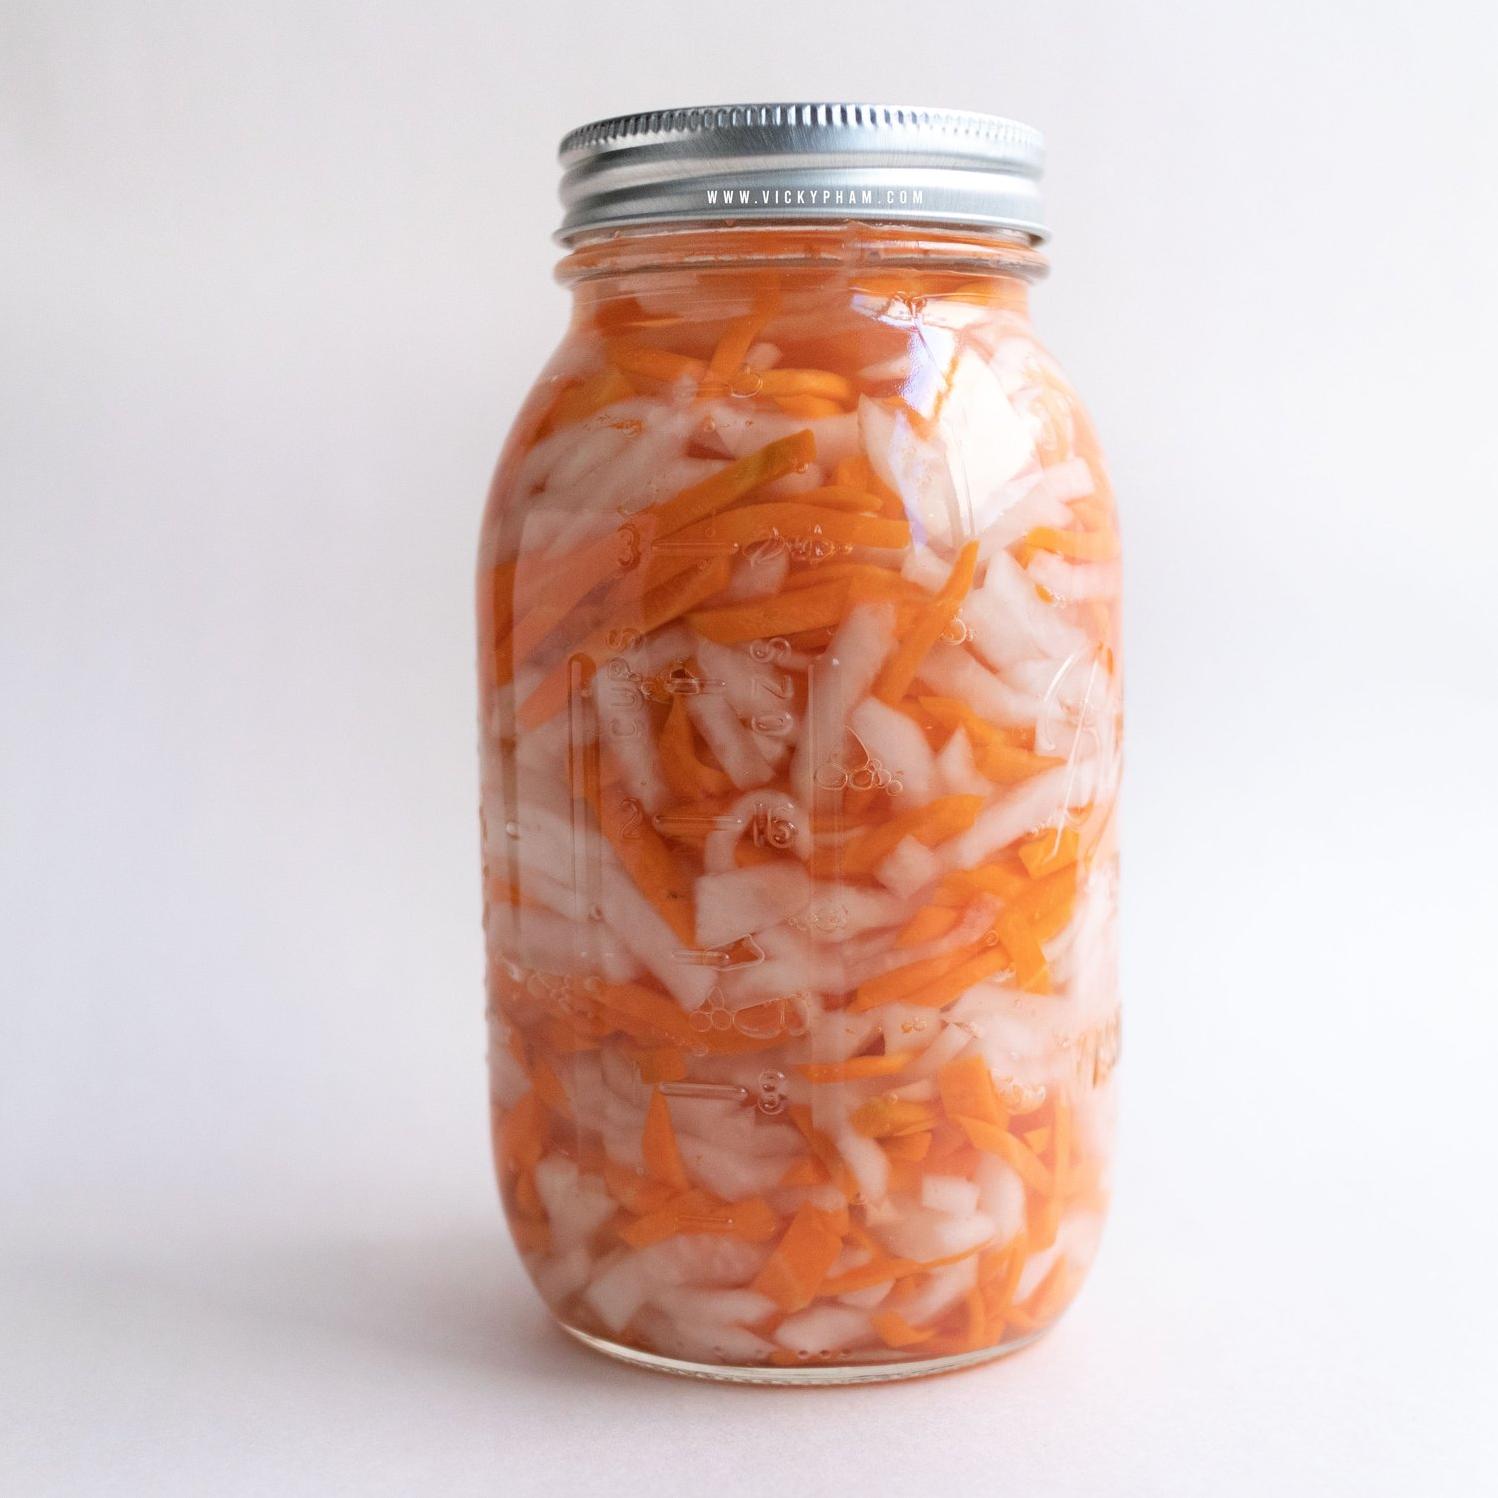  Aromatics like garlic, ginger and chili flakes add bold flavor to this pickled dish.